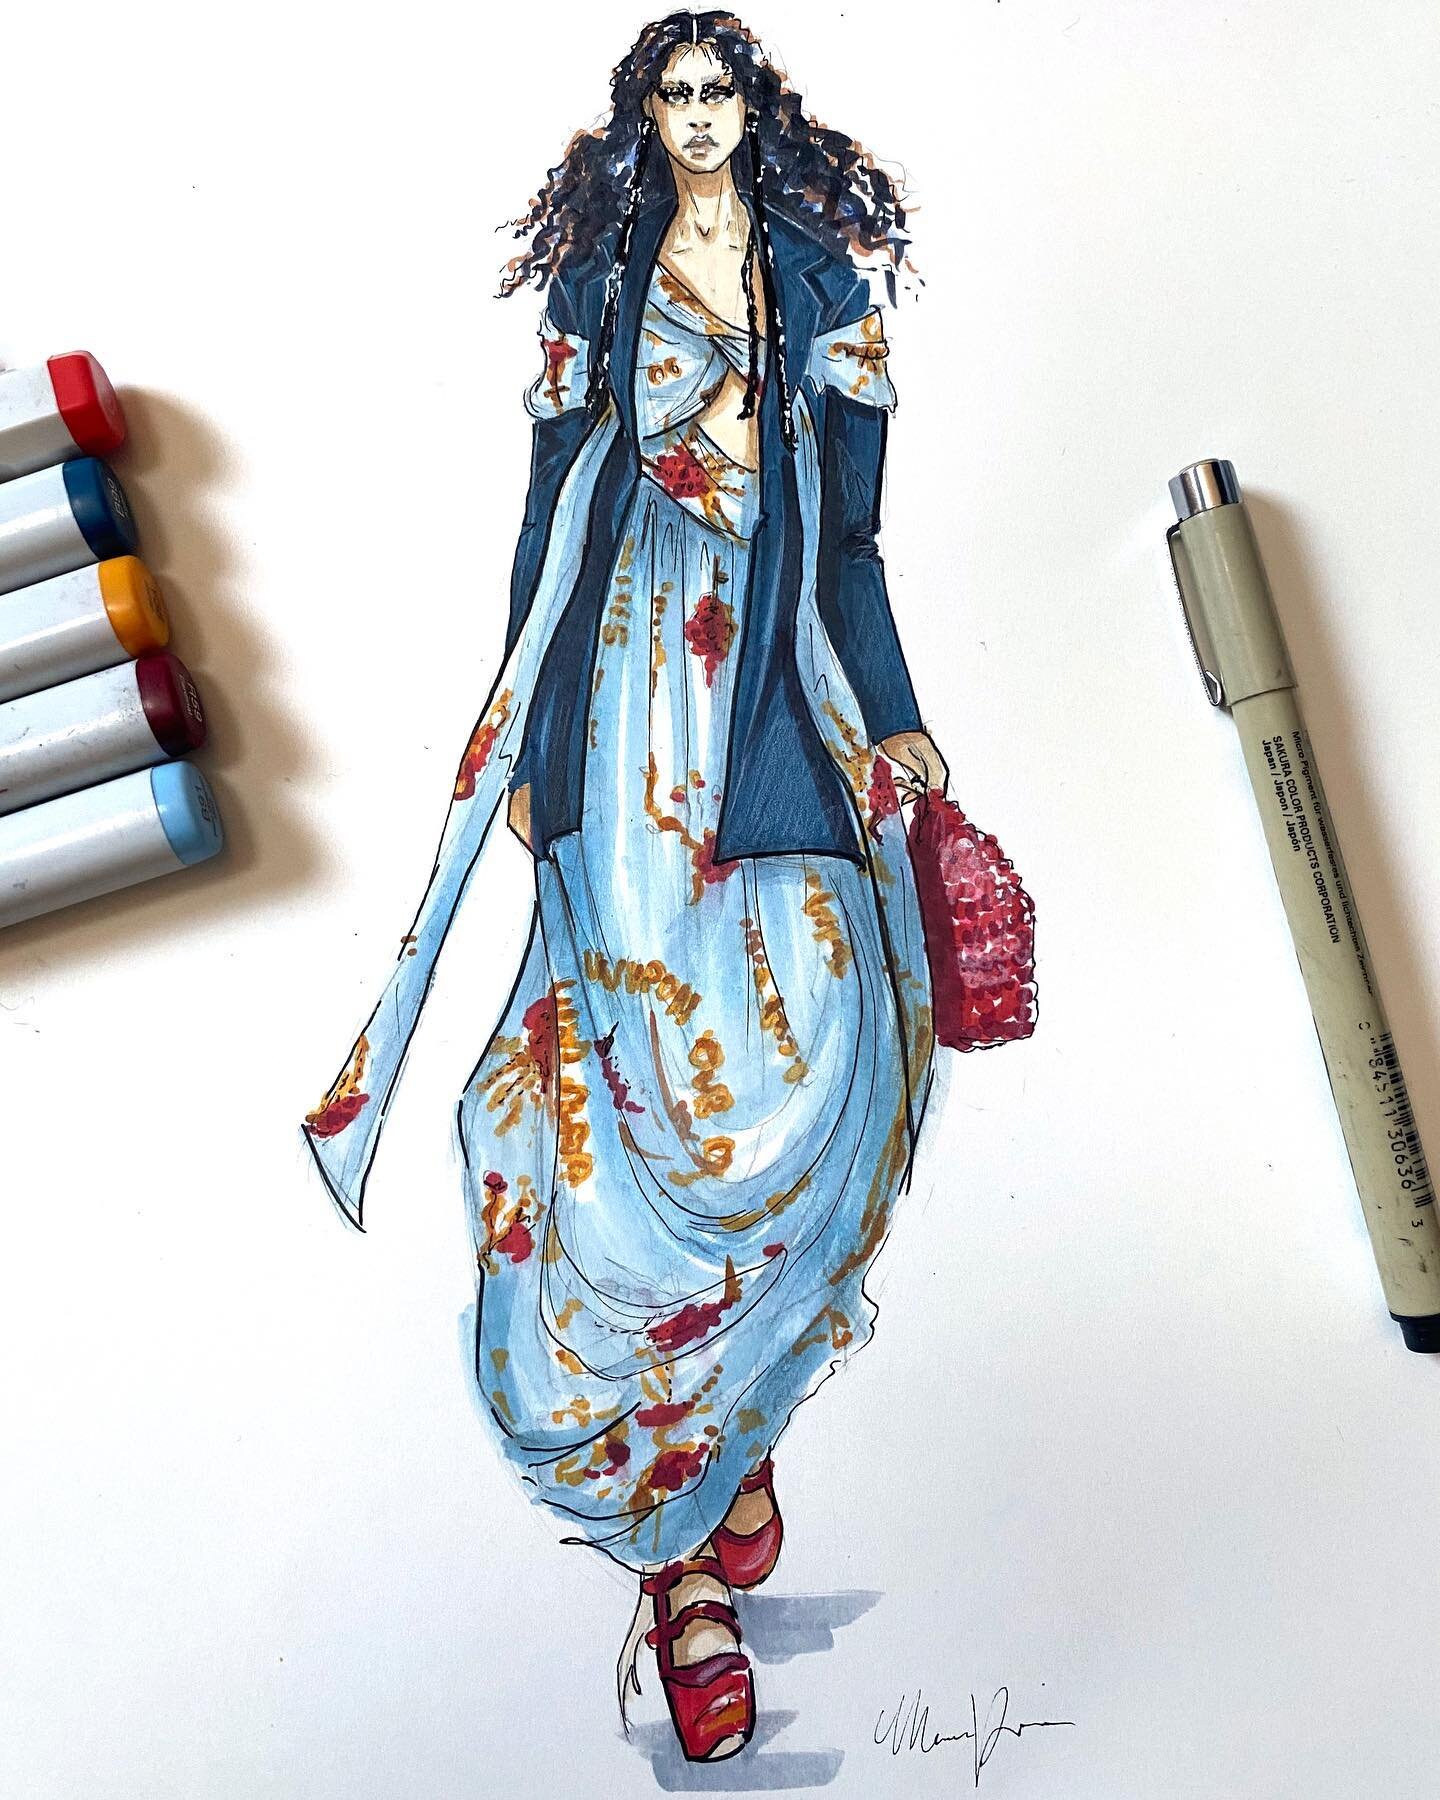 We are feeling the positive energies of change in the air today! Are you too?!

Every day is a great day to celebrate our talented community:
This illustration by @kut.zo our Fashion Illustration Instructor is inspired by @simonerocha_ Fall &lsquo;20